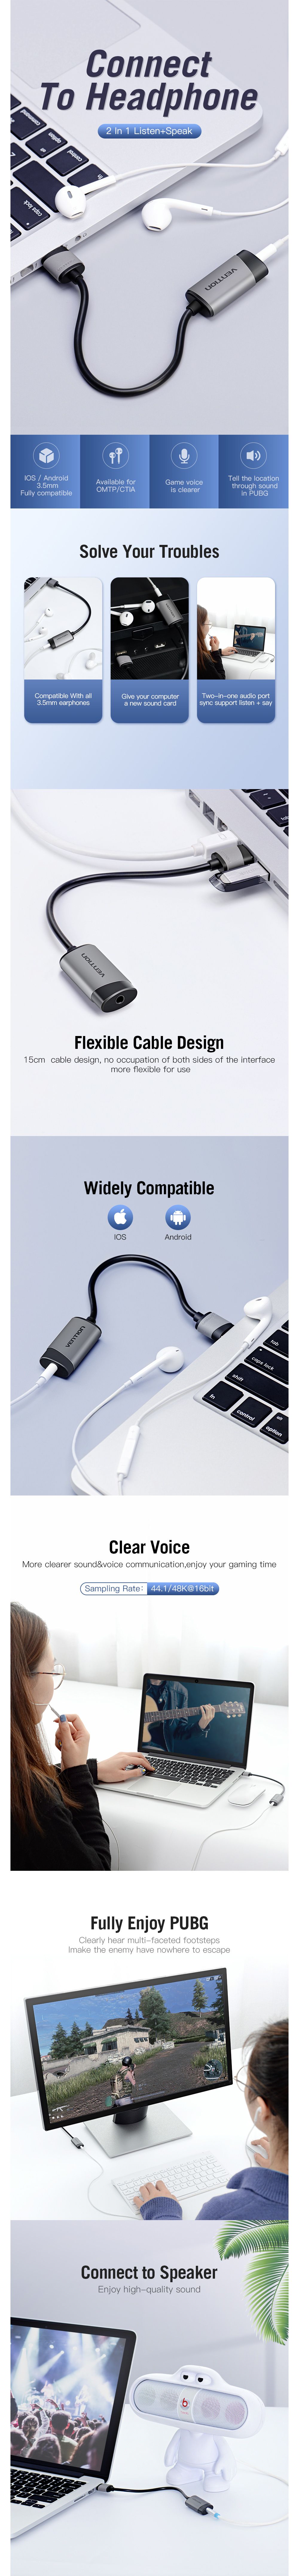 Vention-CDJHB-USB-External-Sound-Card-USB-to-AUX-Jack-35mm-Earphone-Adapter-Audio-Mic-Sound-Card-51--1674983